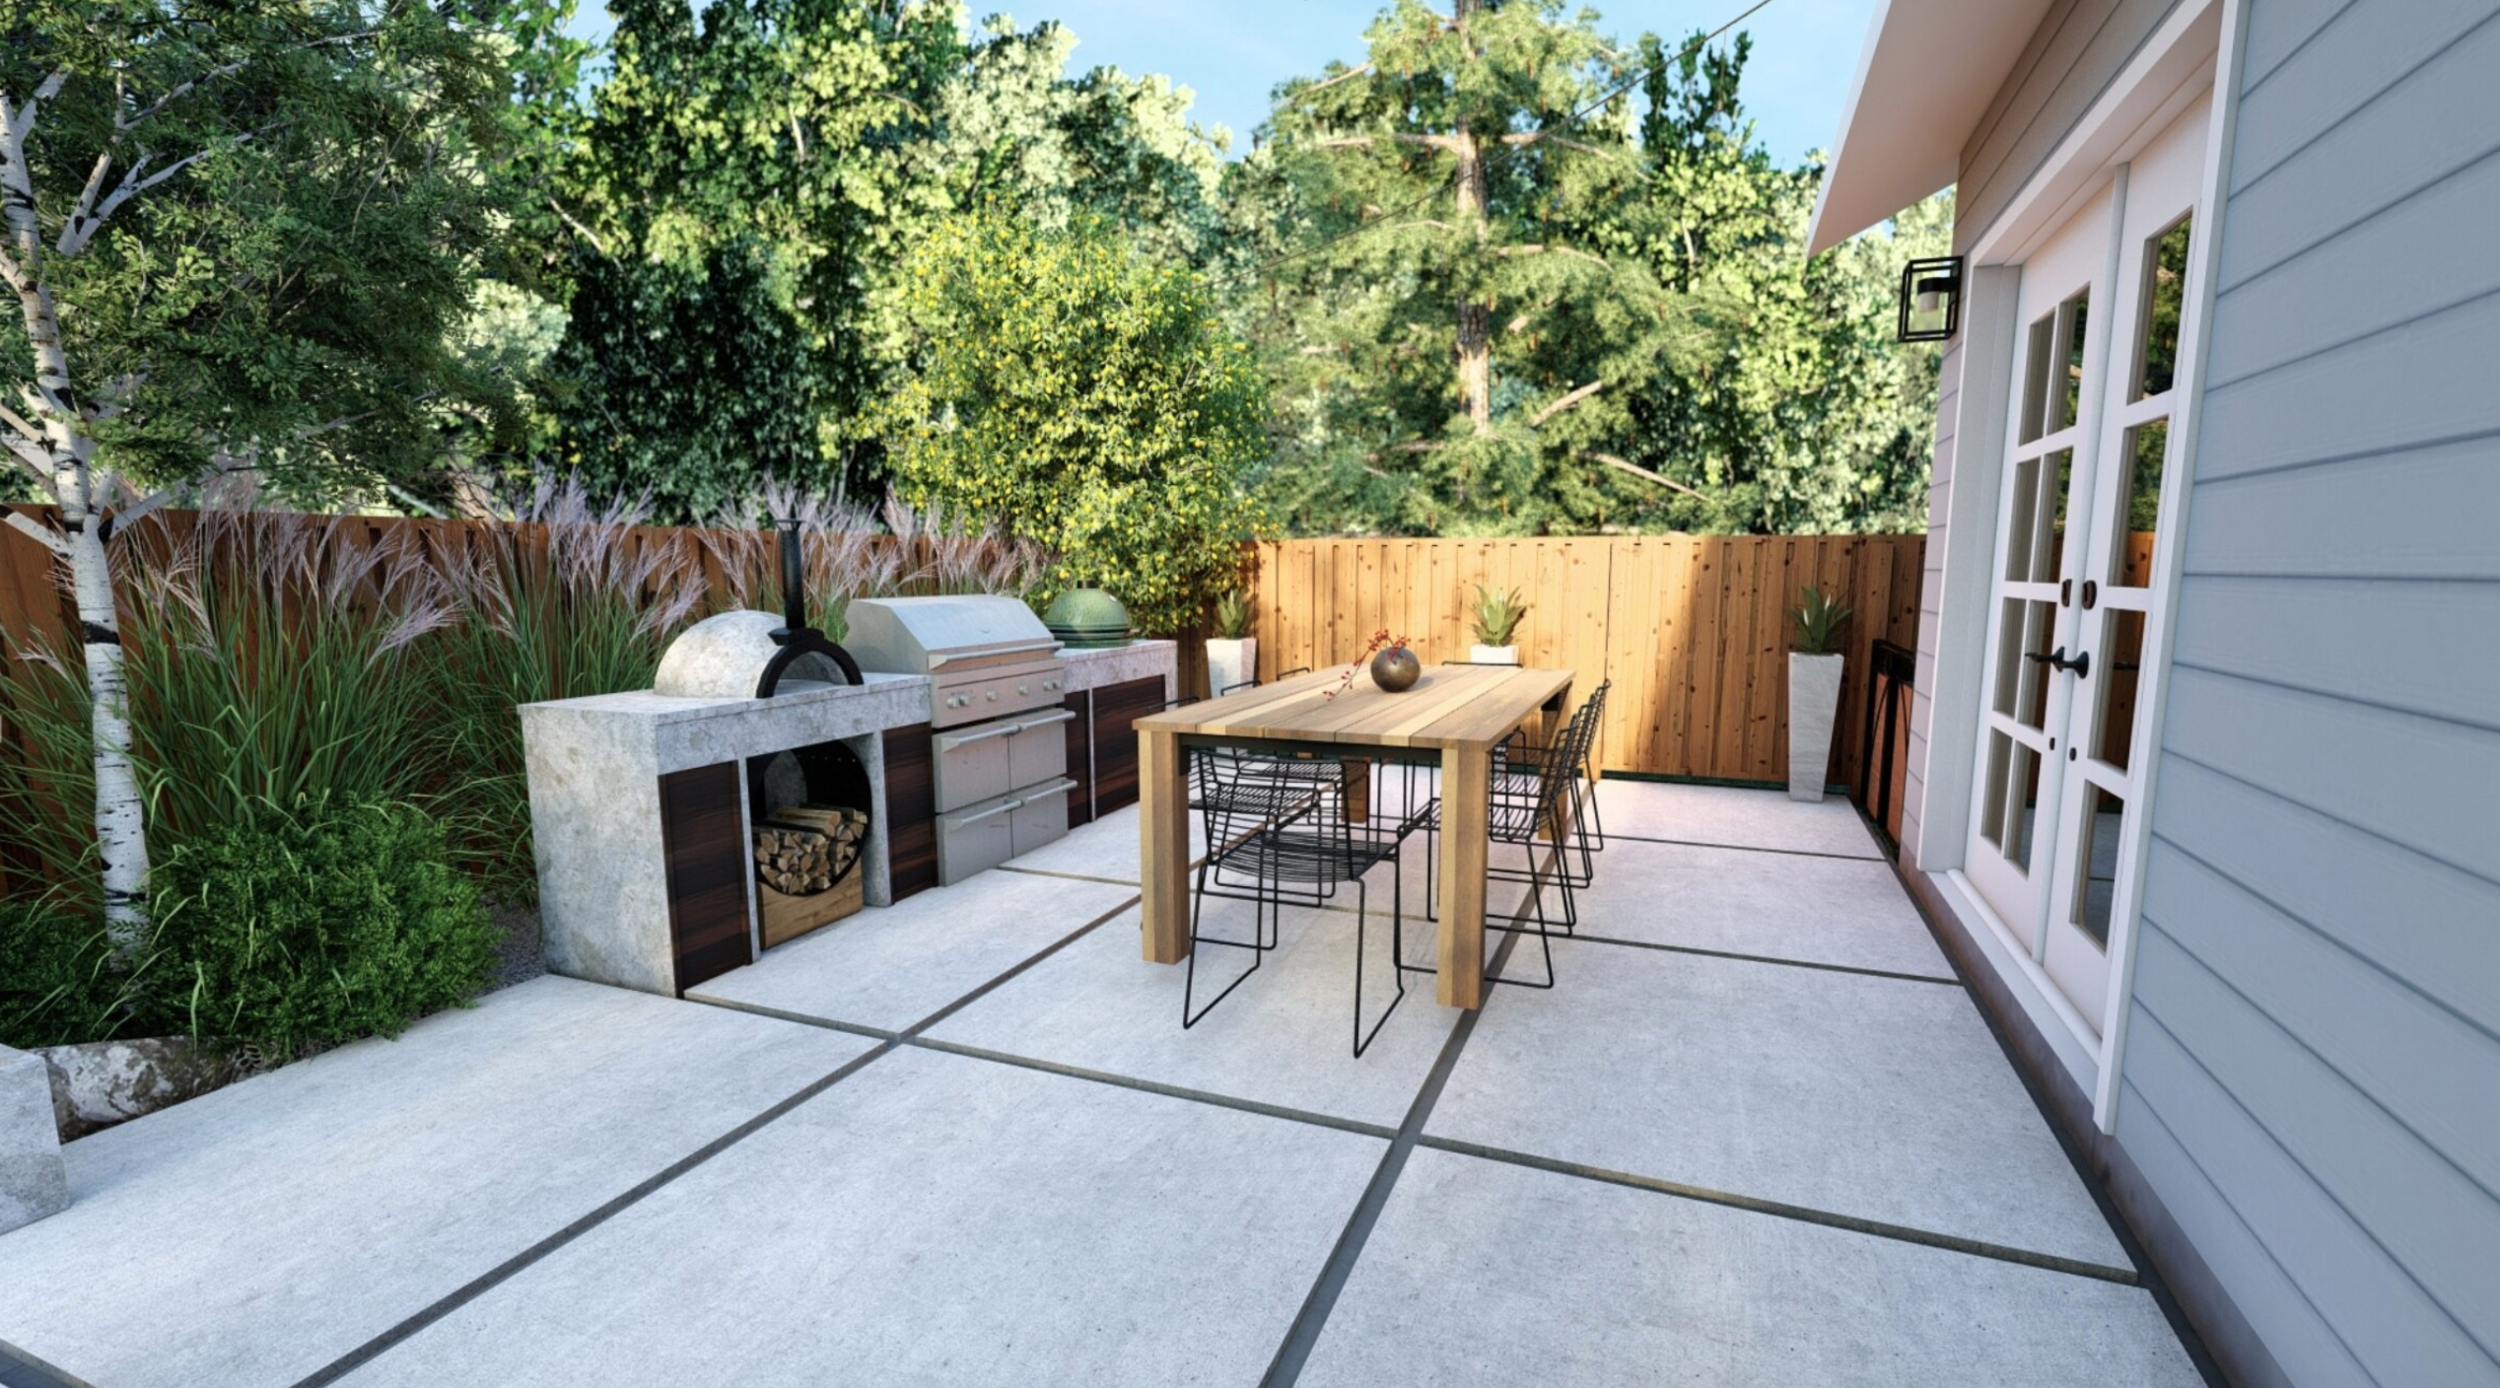 Here, the homeowners knew they wanted a long dining table to be a center piece of their backyard, so our designers made sure to include a large, even space for their table.